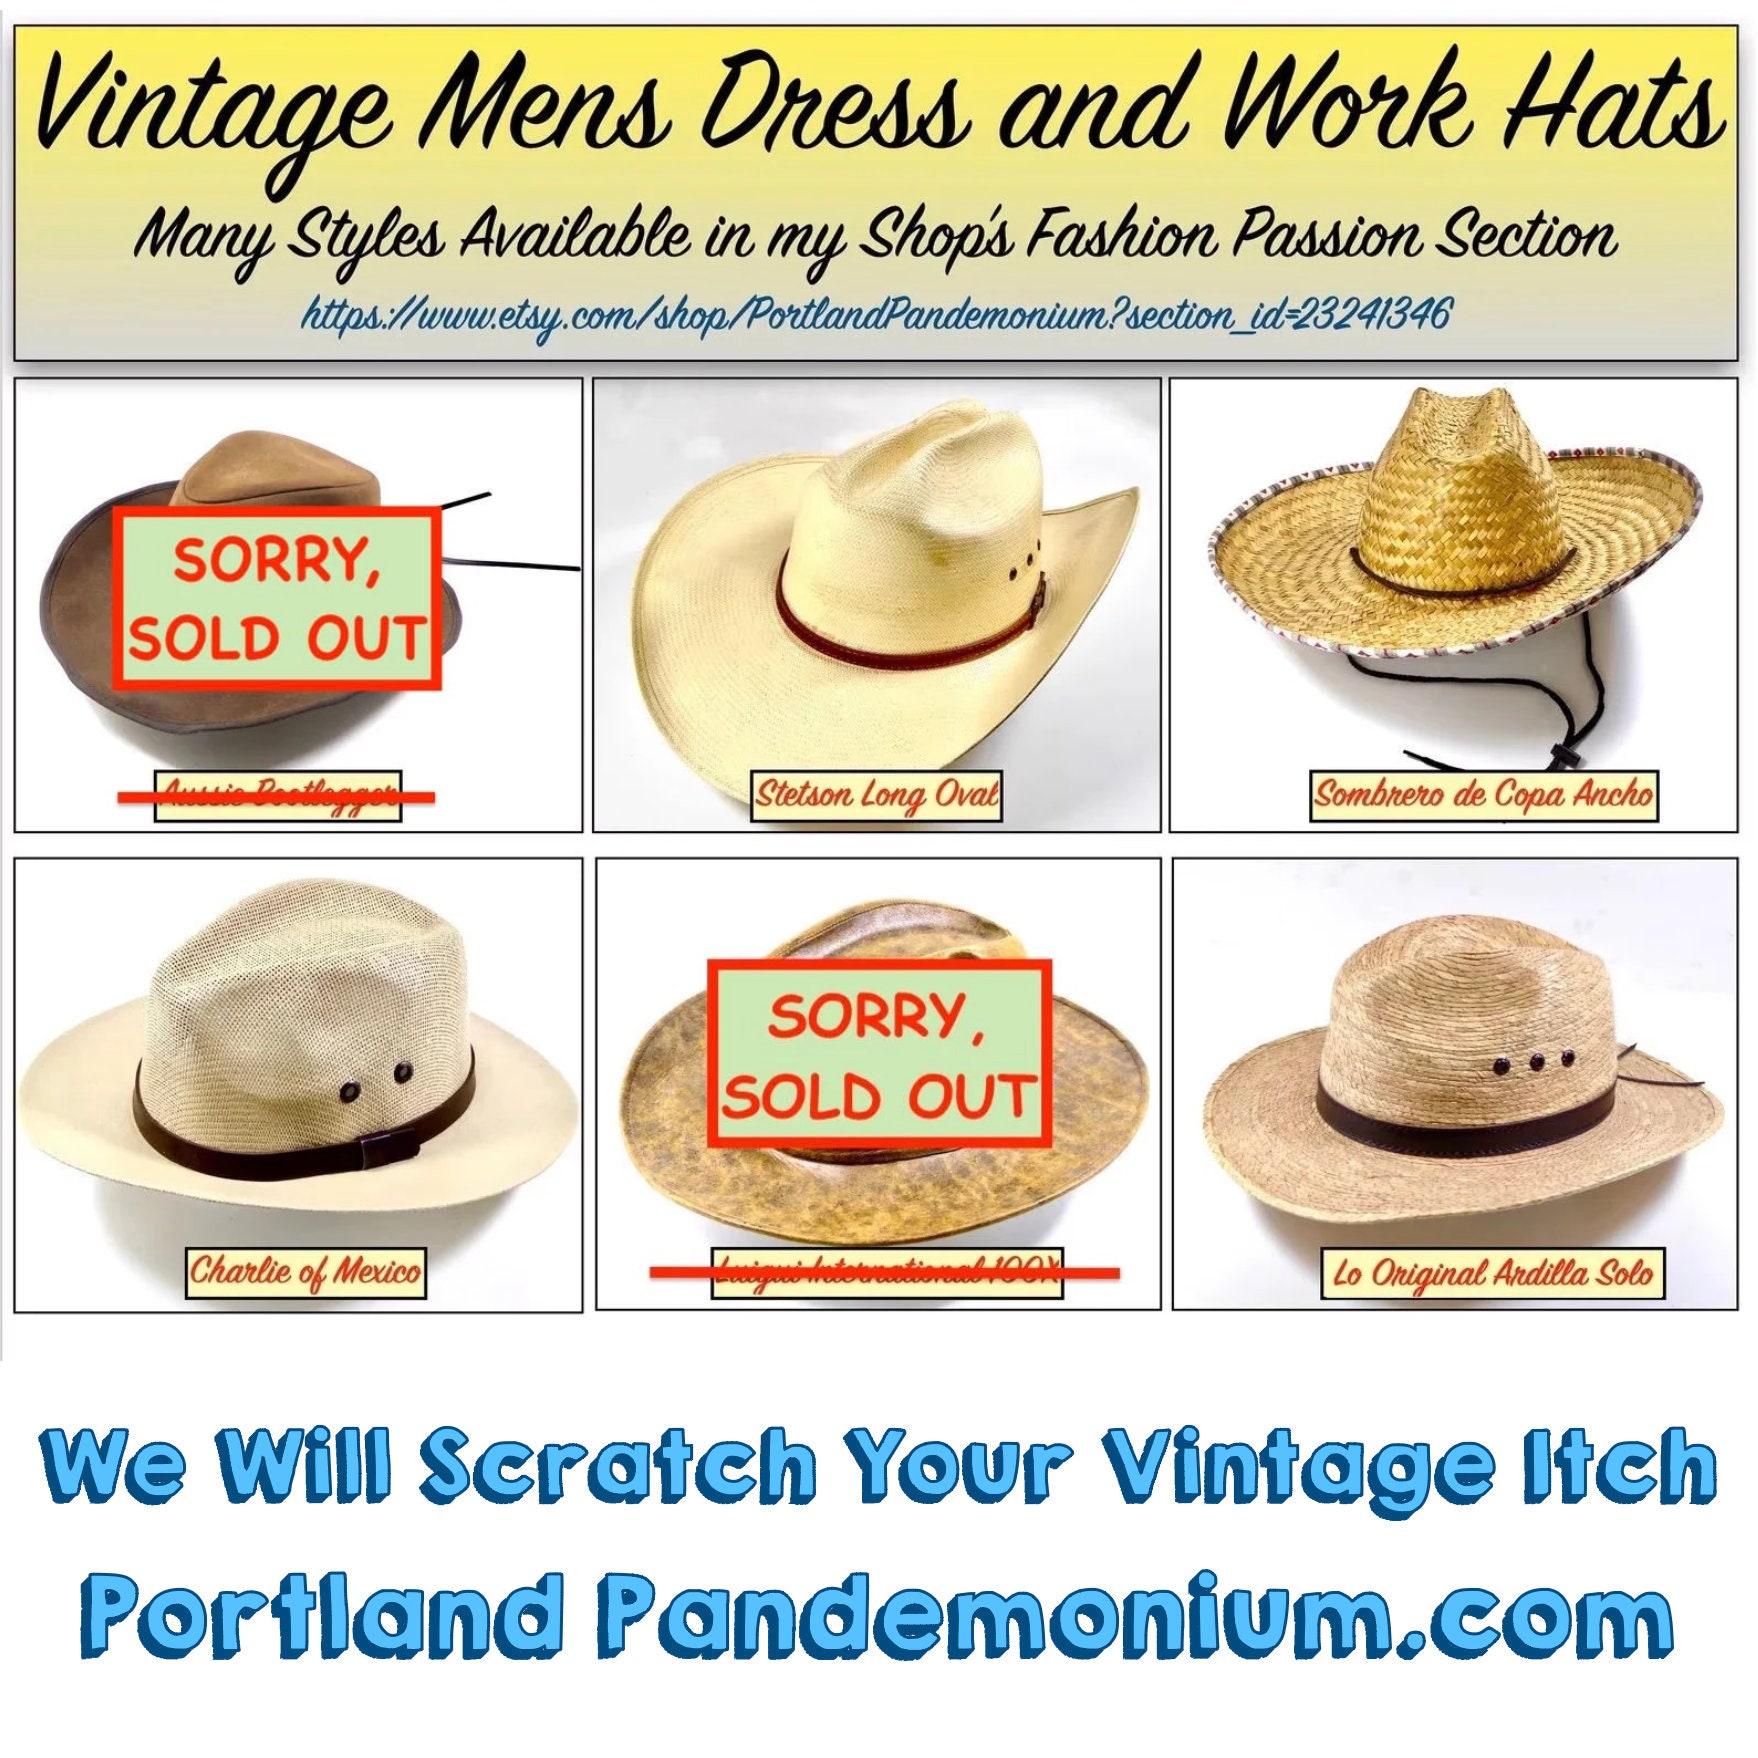 Vintage Mens Cowboy Hats, Leather, Oilskin, Straw, Dress & Work, Stetson, Outback Bootlegger, Charlie, Luigui, Sombrero ancho, Solo Squirrel